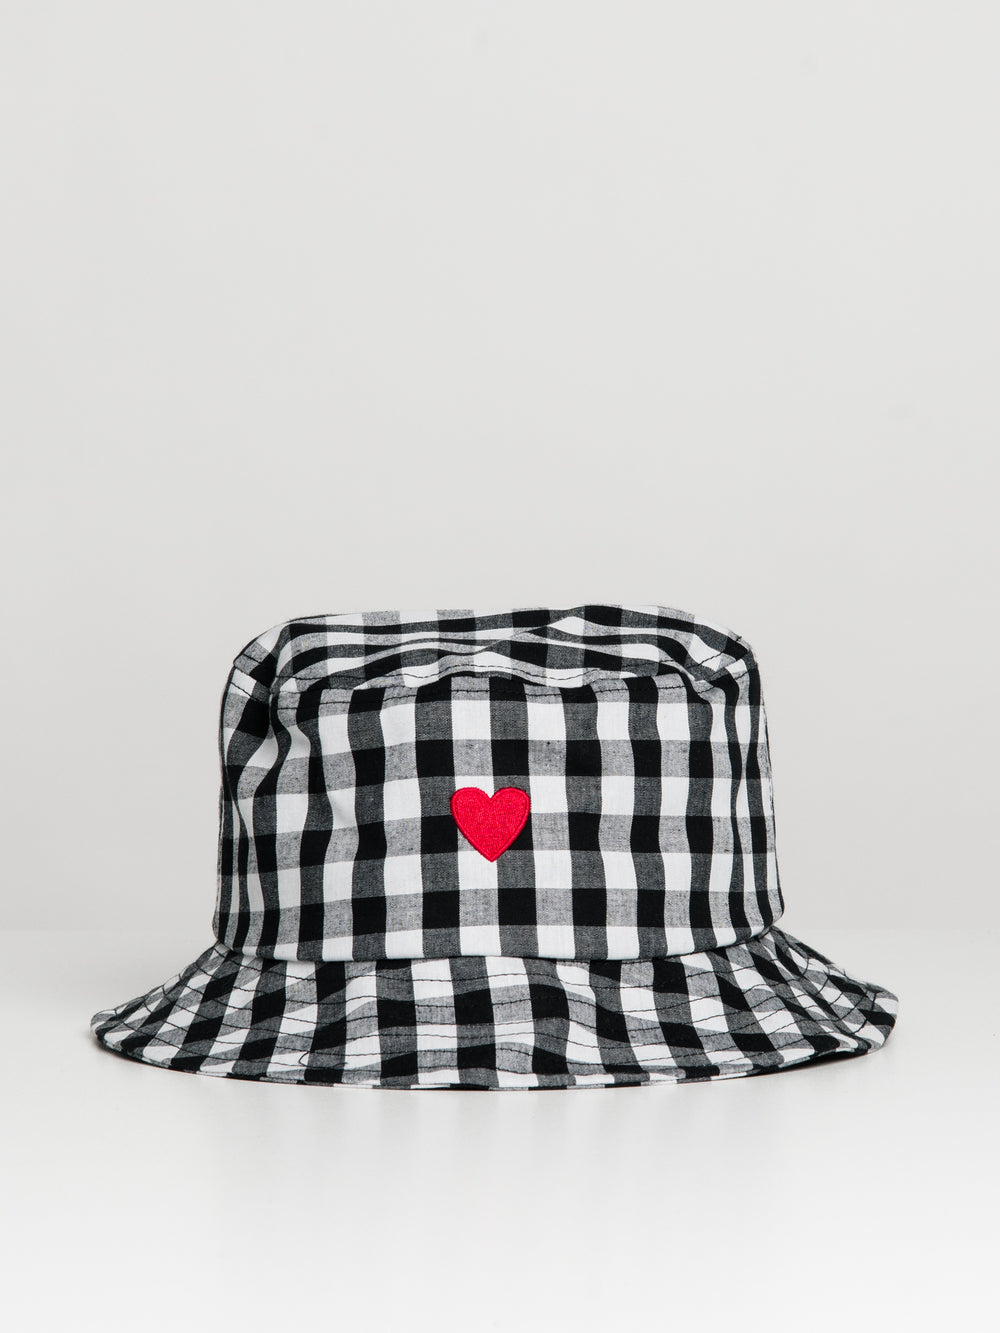 DLG BUCKET HAT - HEART ON CHECKERED PRINT - CLEARANCE